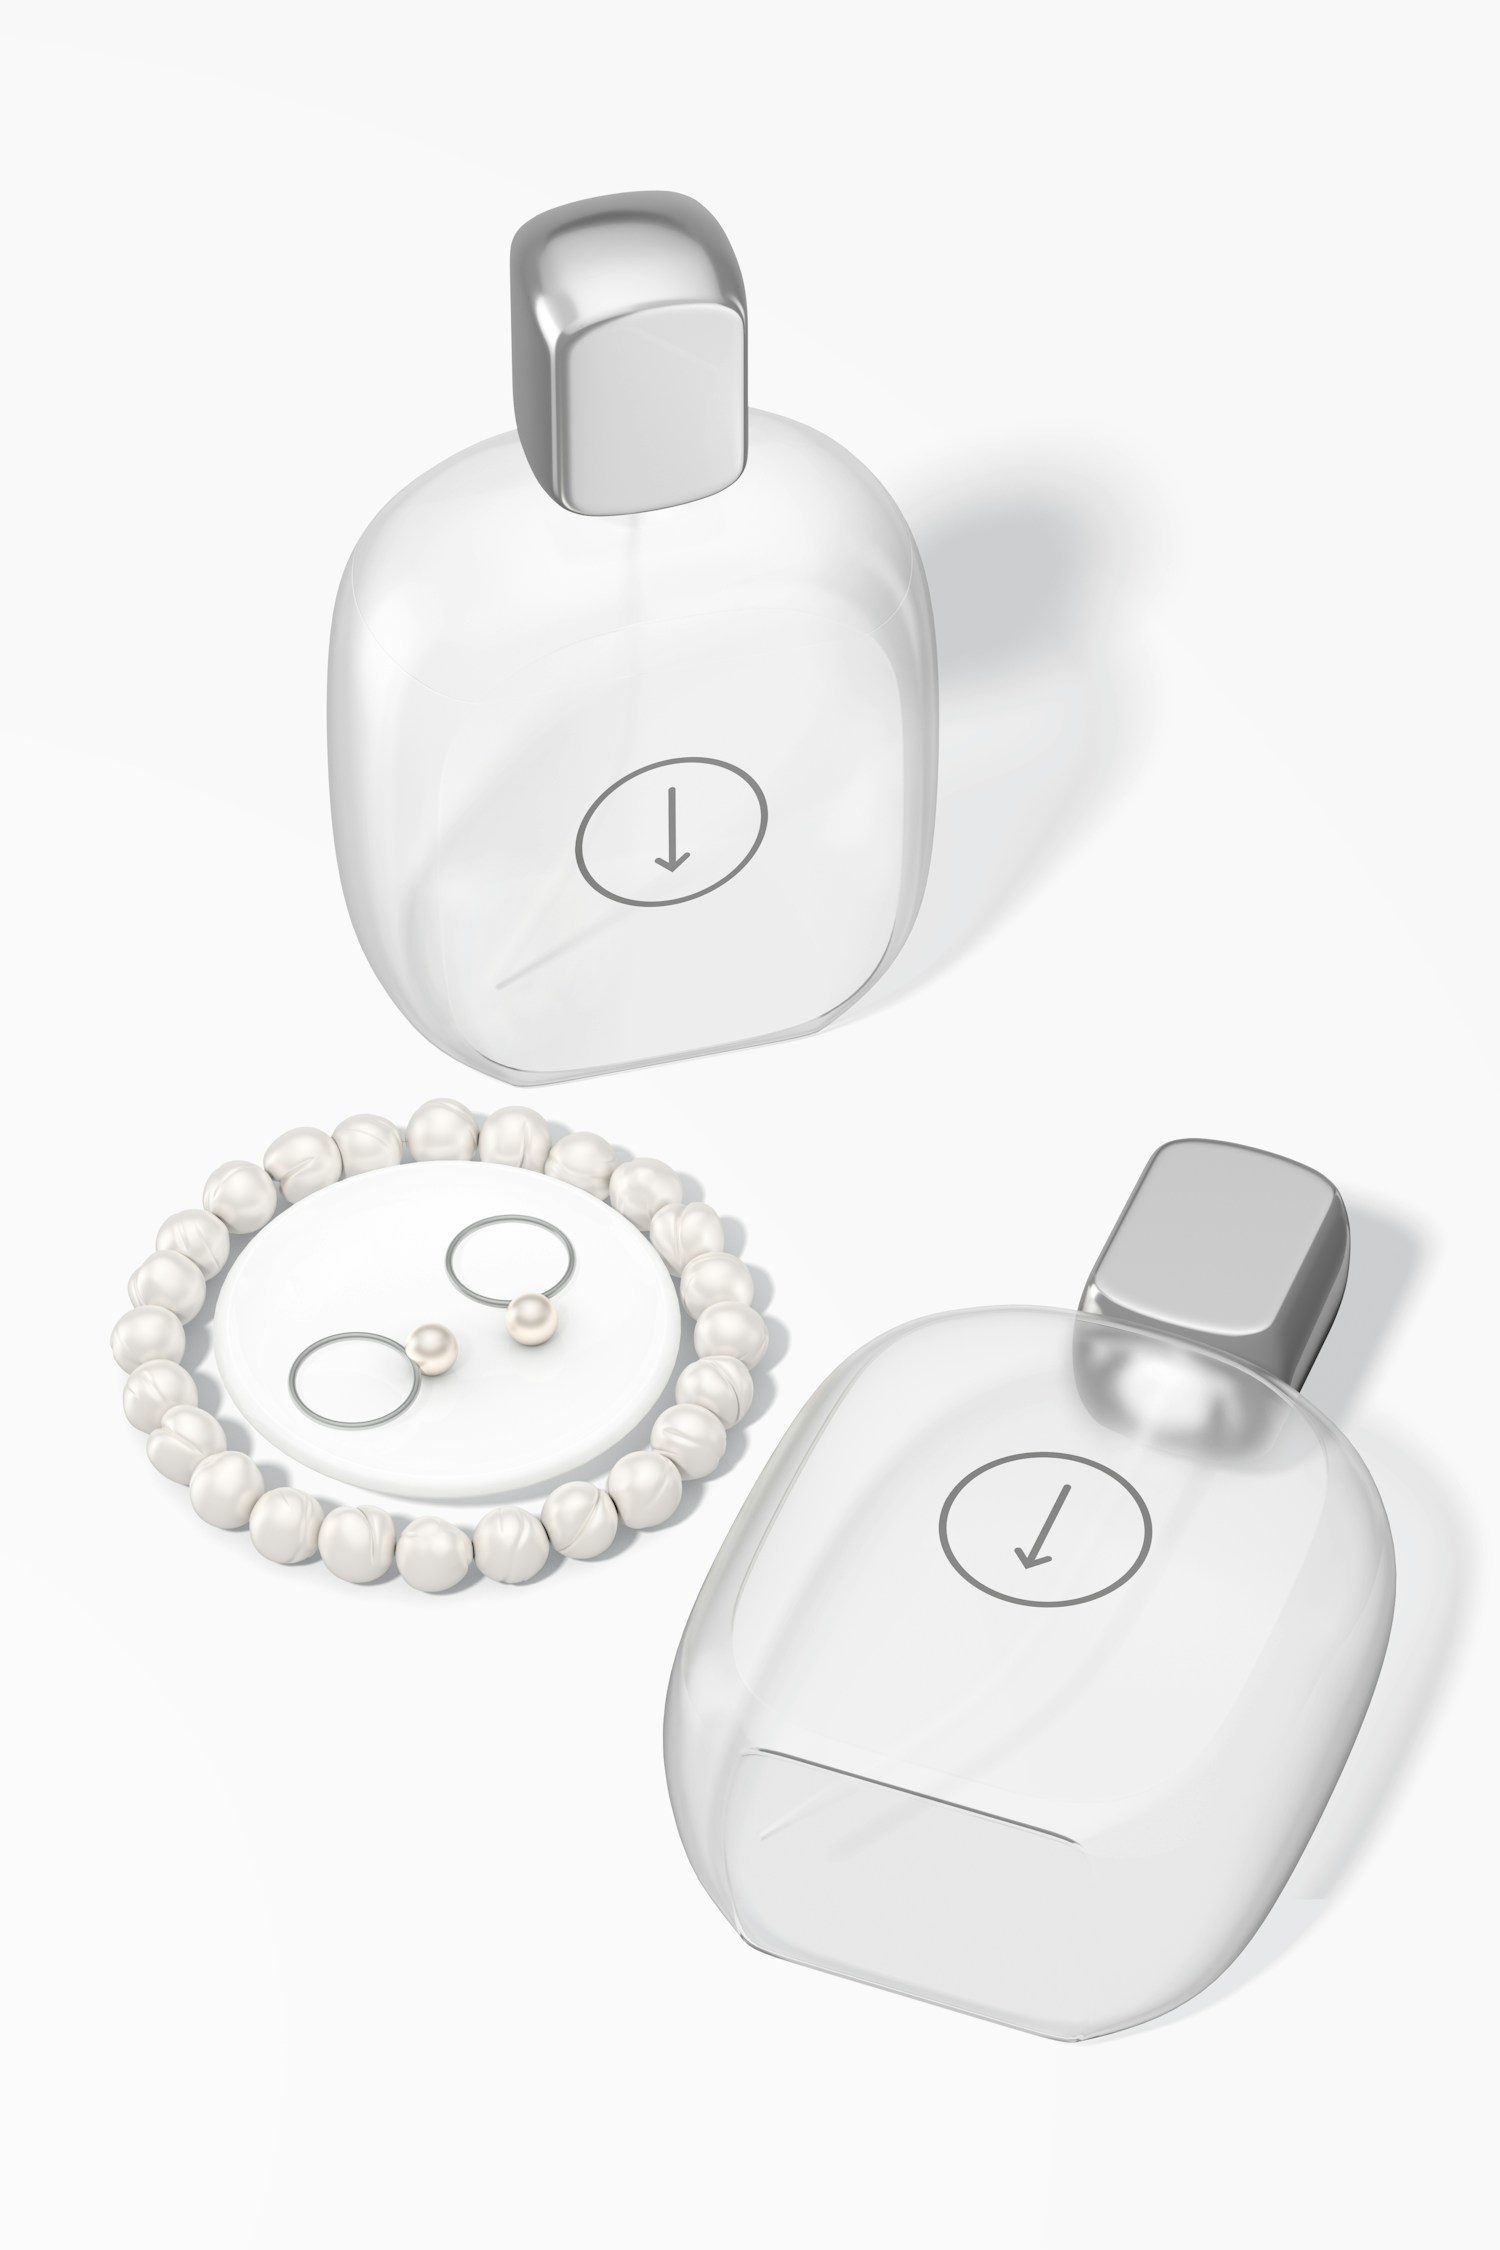 Oval Luxury Perfume Bottles Mockup, Standing and Dropped